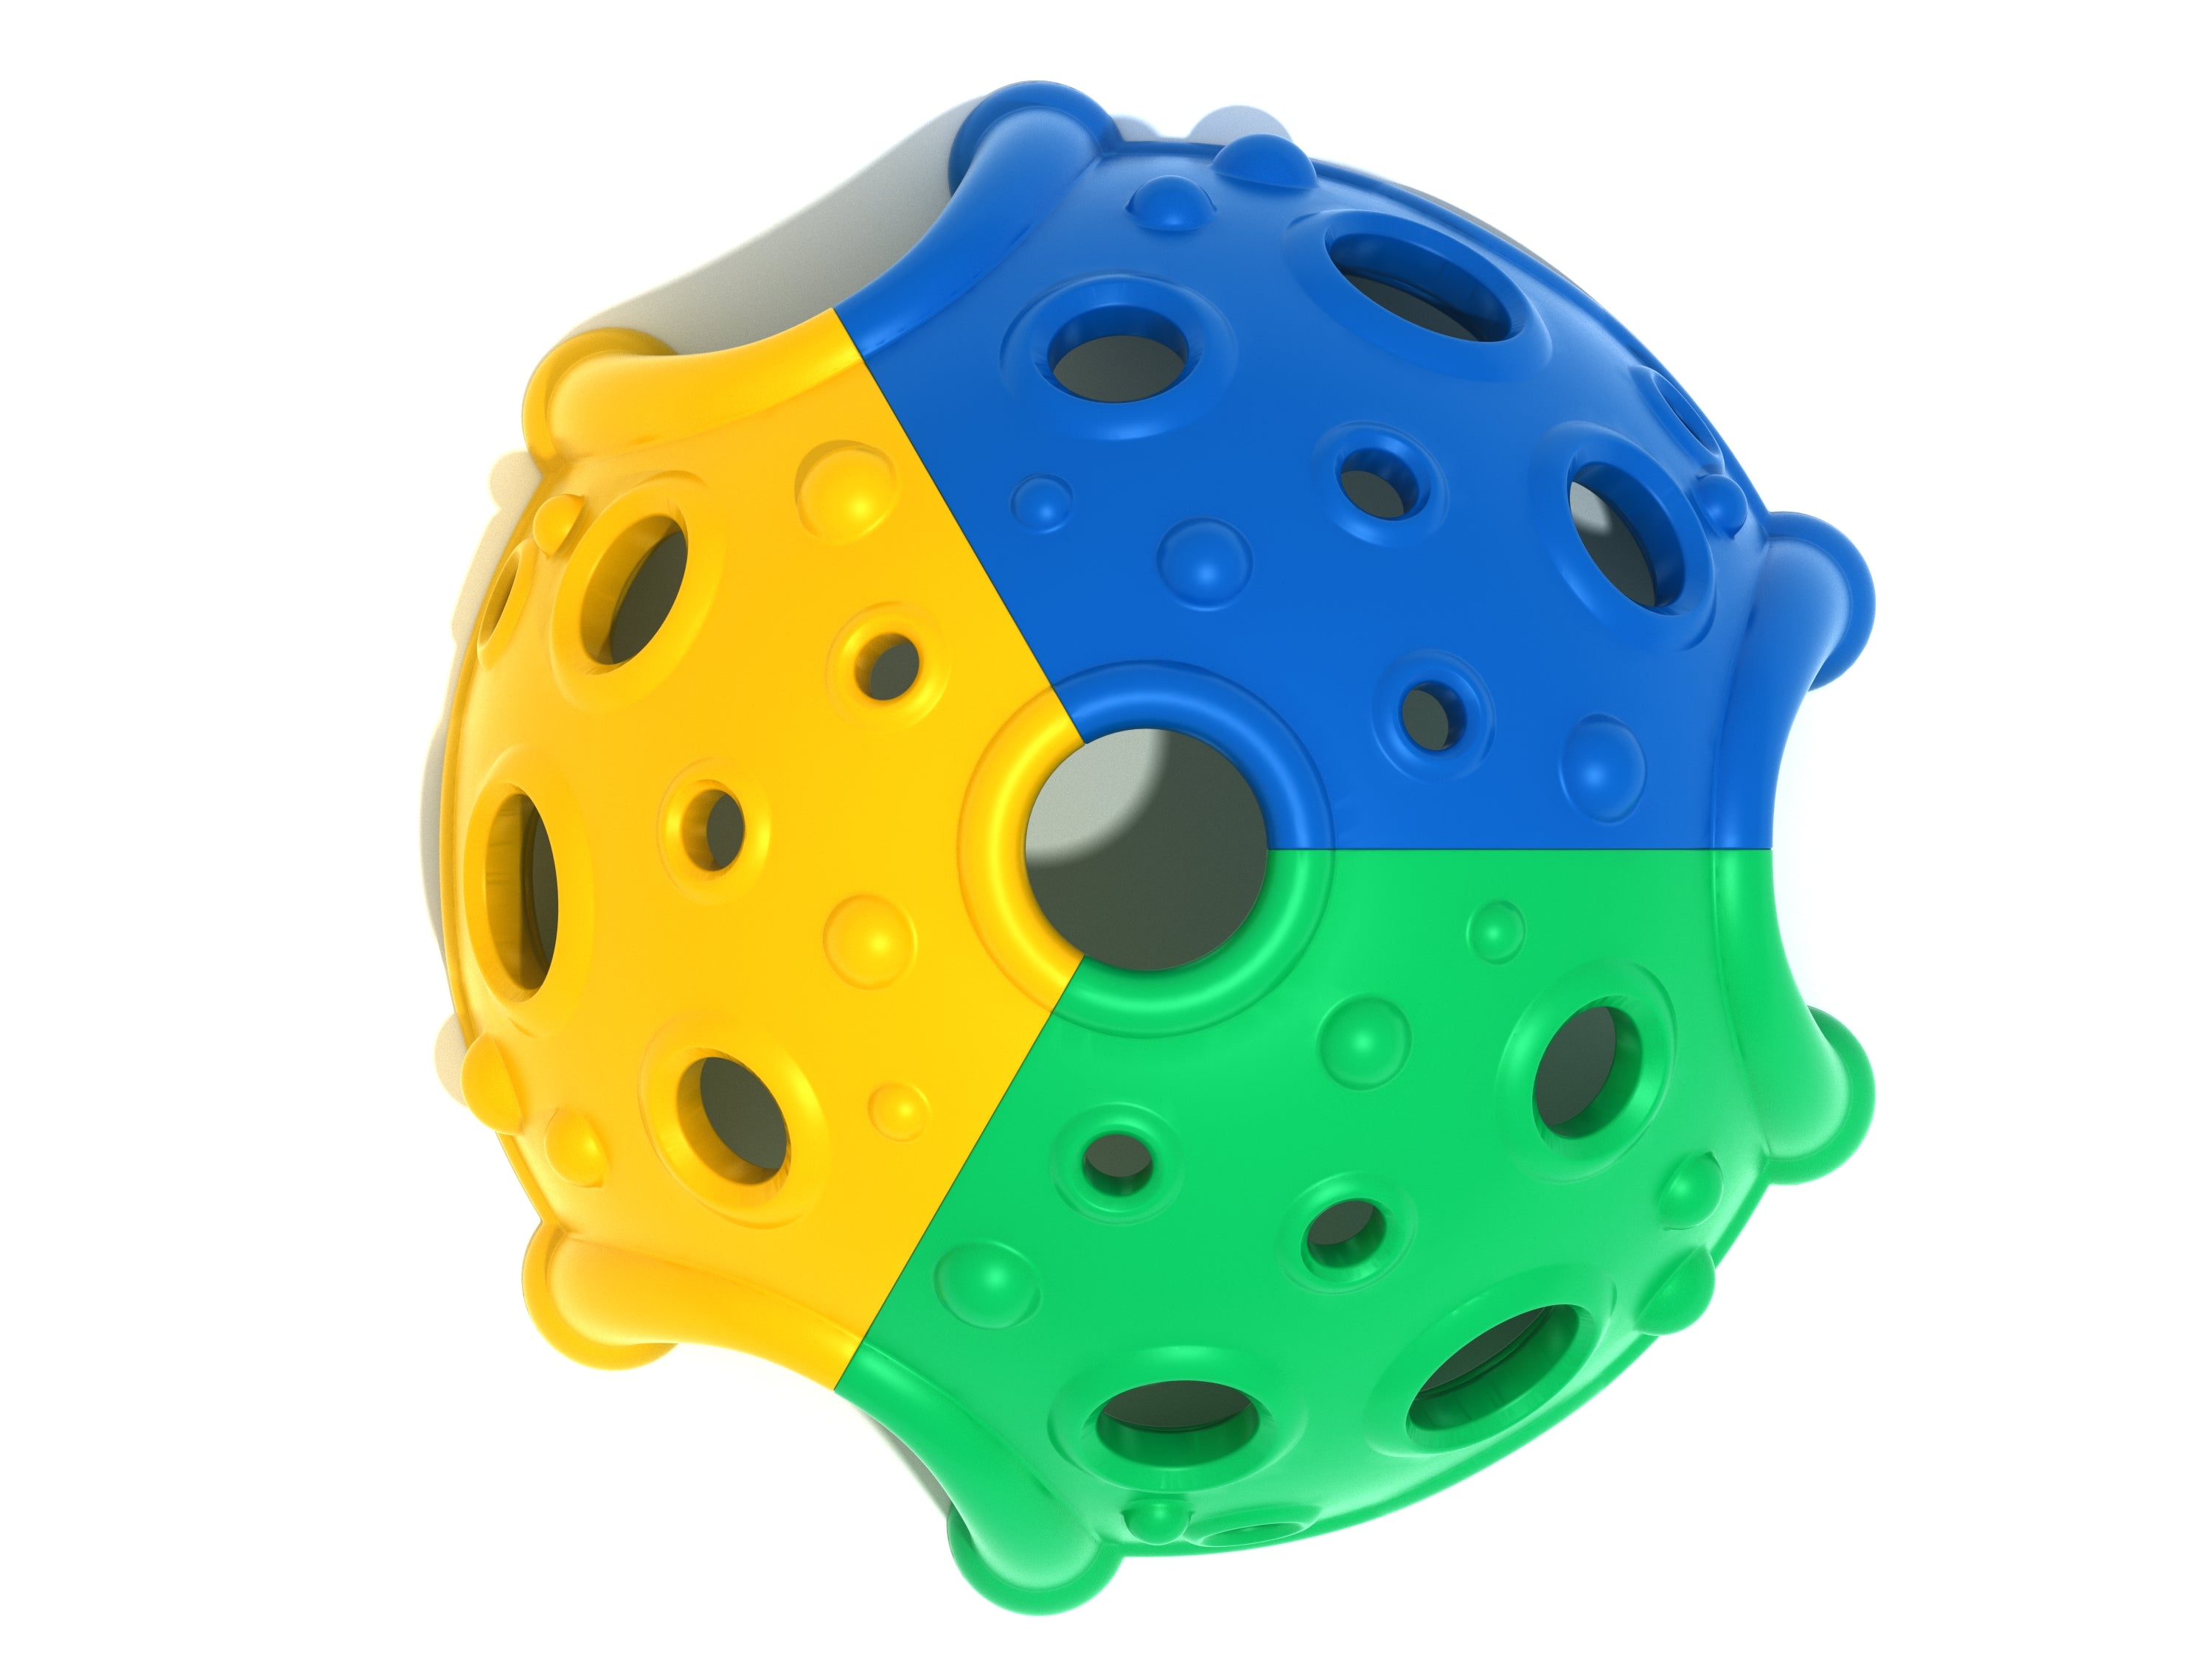 Logan's Dome Primary Colors Top View